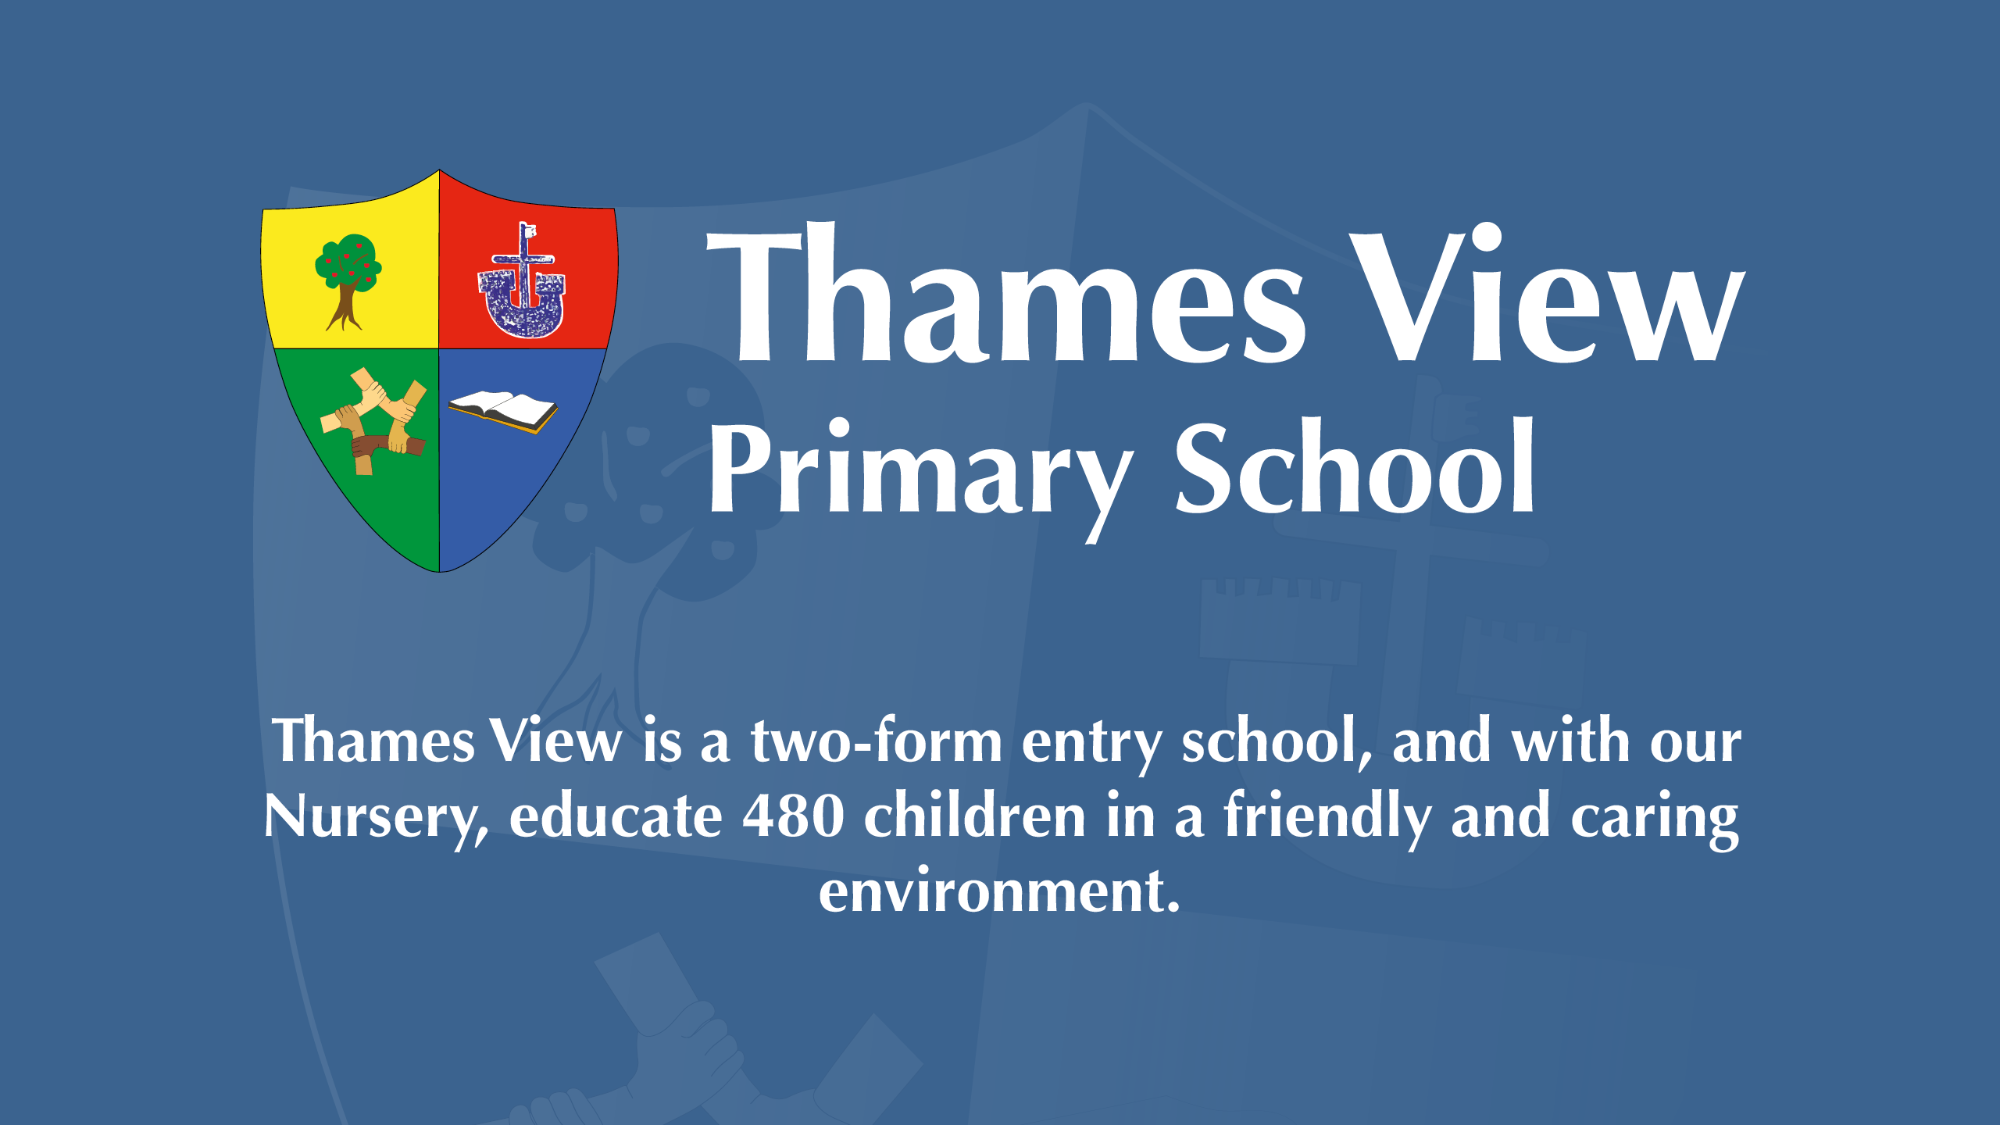 Thames View Primary School on a blue background.